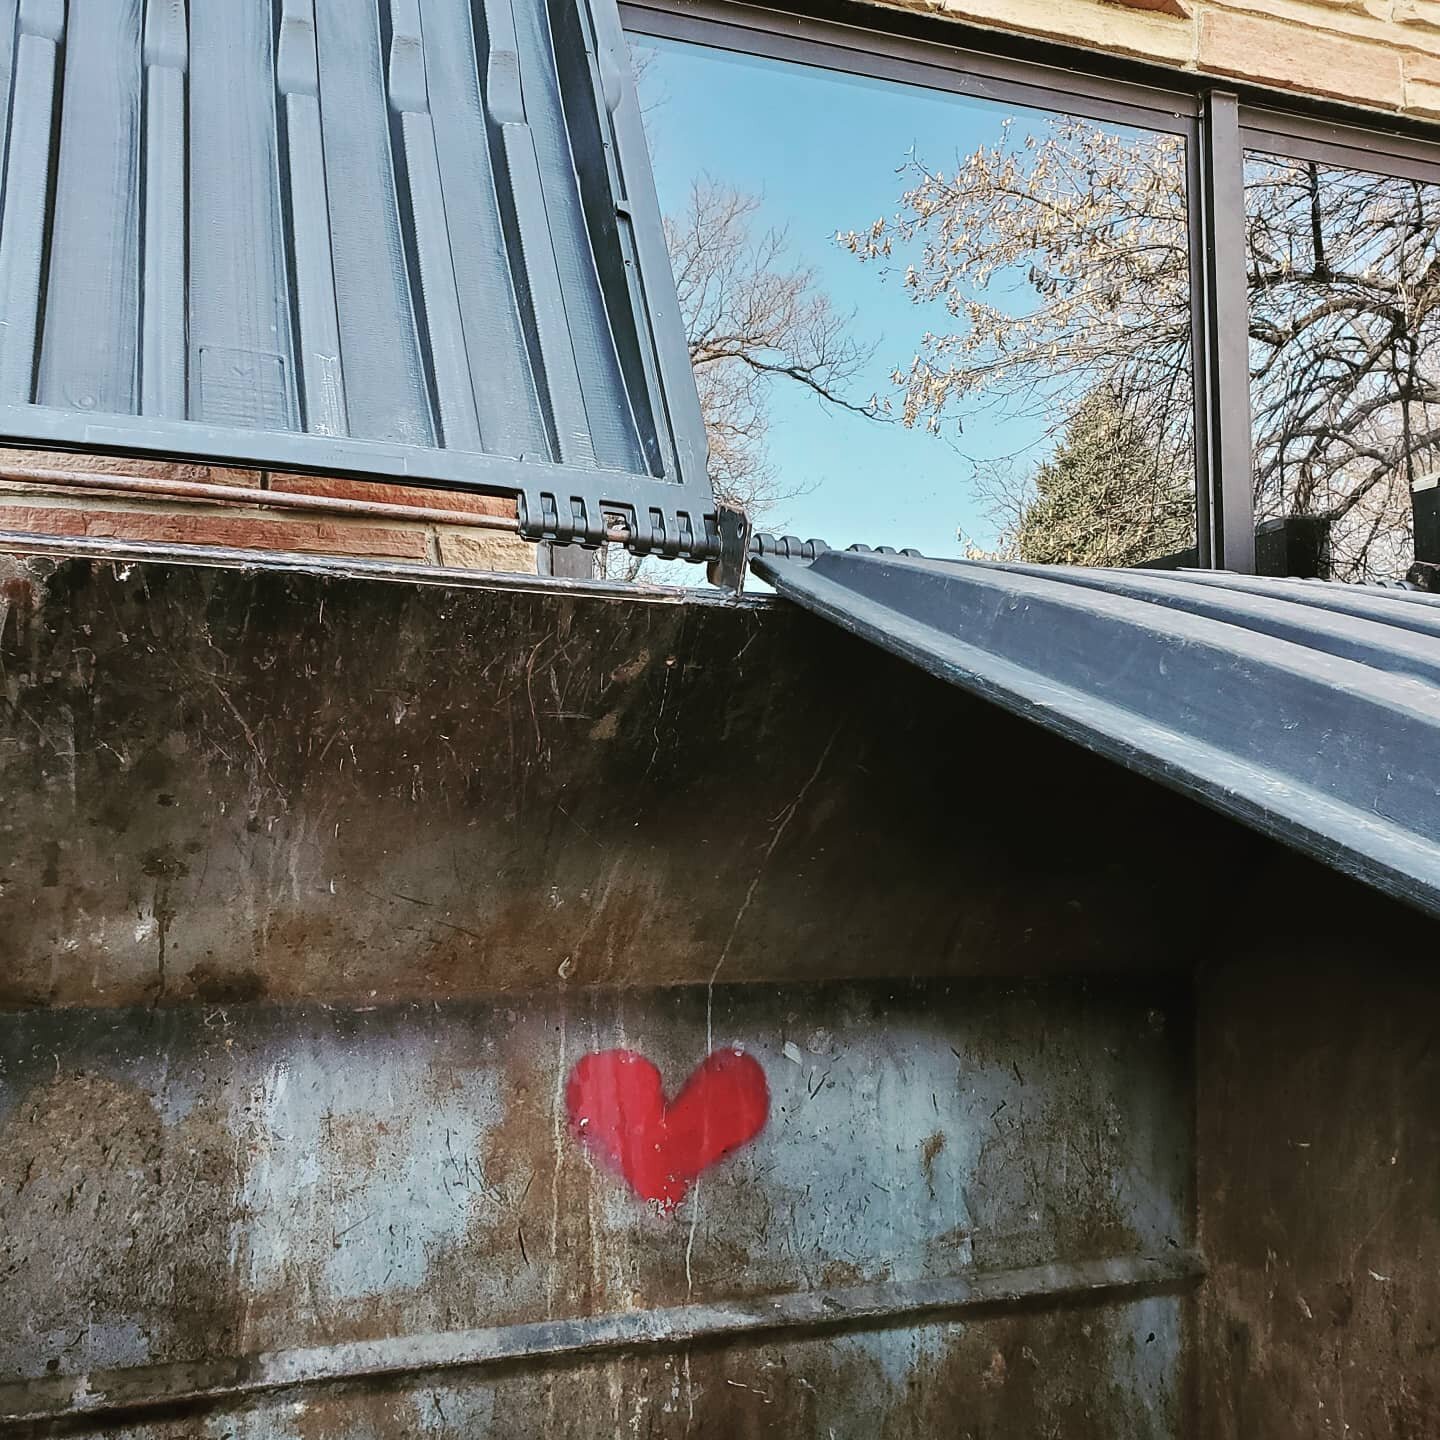 Heart in a dumpster. Kinda how I'm feeling right now. But maybe there's some hope to be found somewhere? I mean, someone painted it at least. 

#restinpower #guncontrolnow #bouldershooting